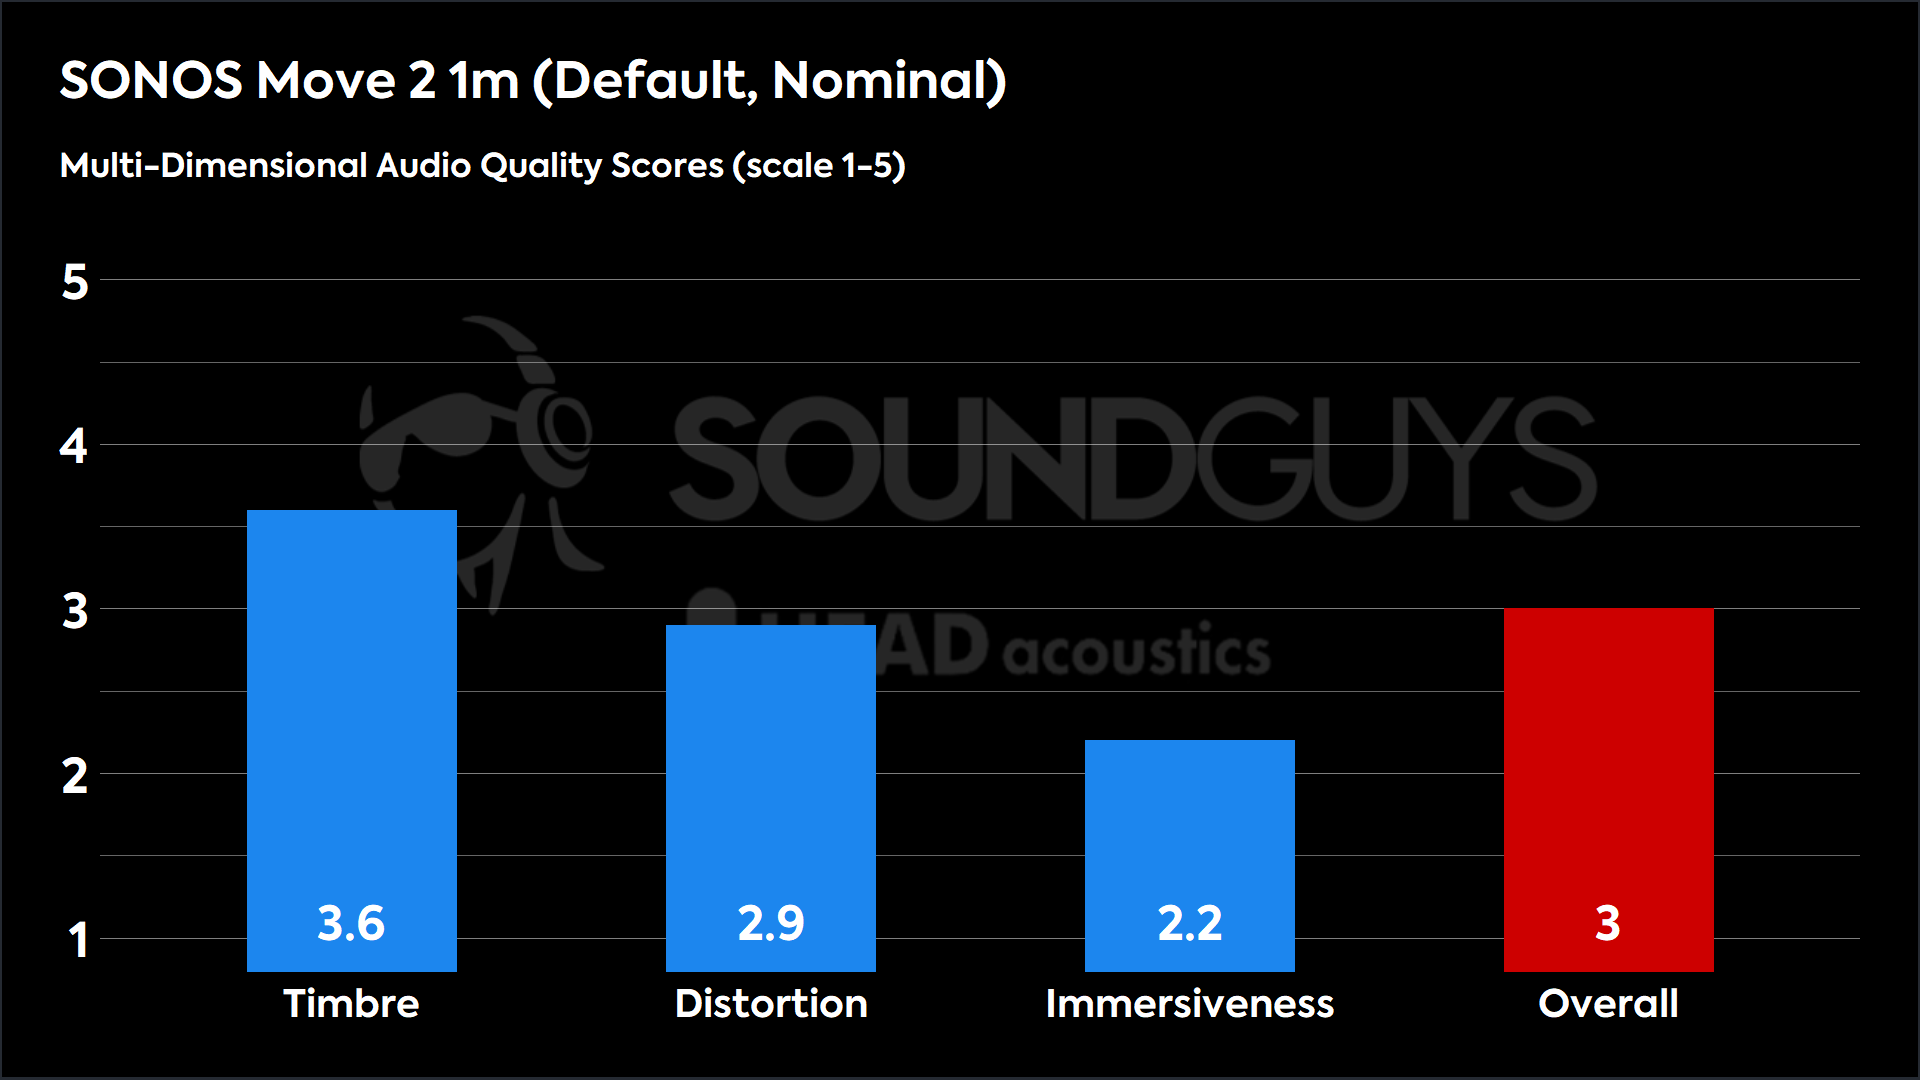 A bar chart showing the Multi Dimensional Audio Quality Scores for the Sonos Move 2.